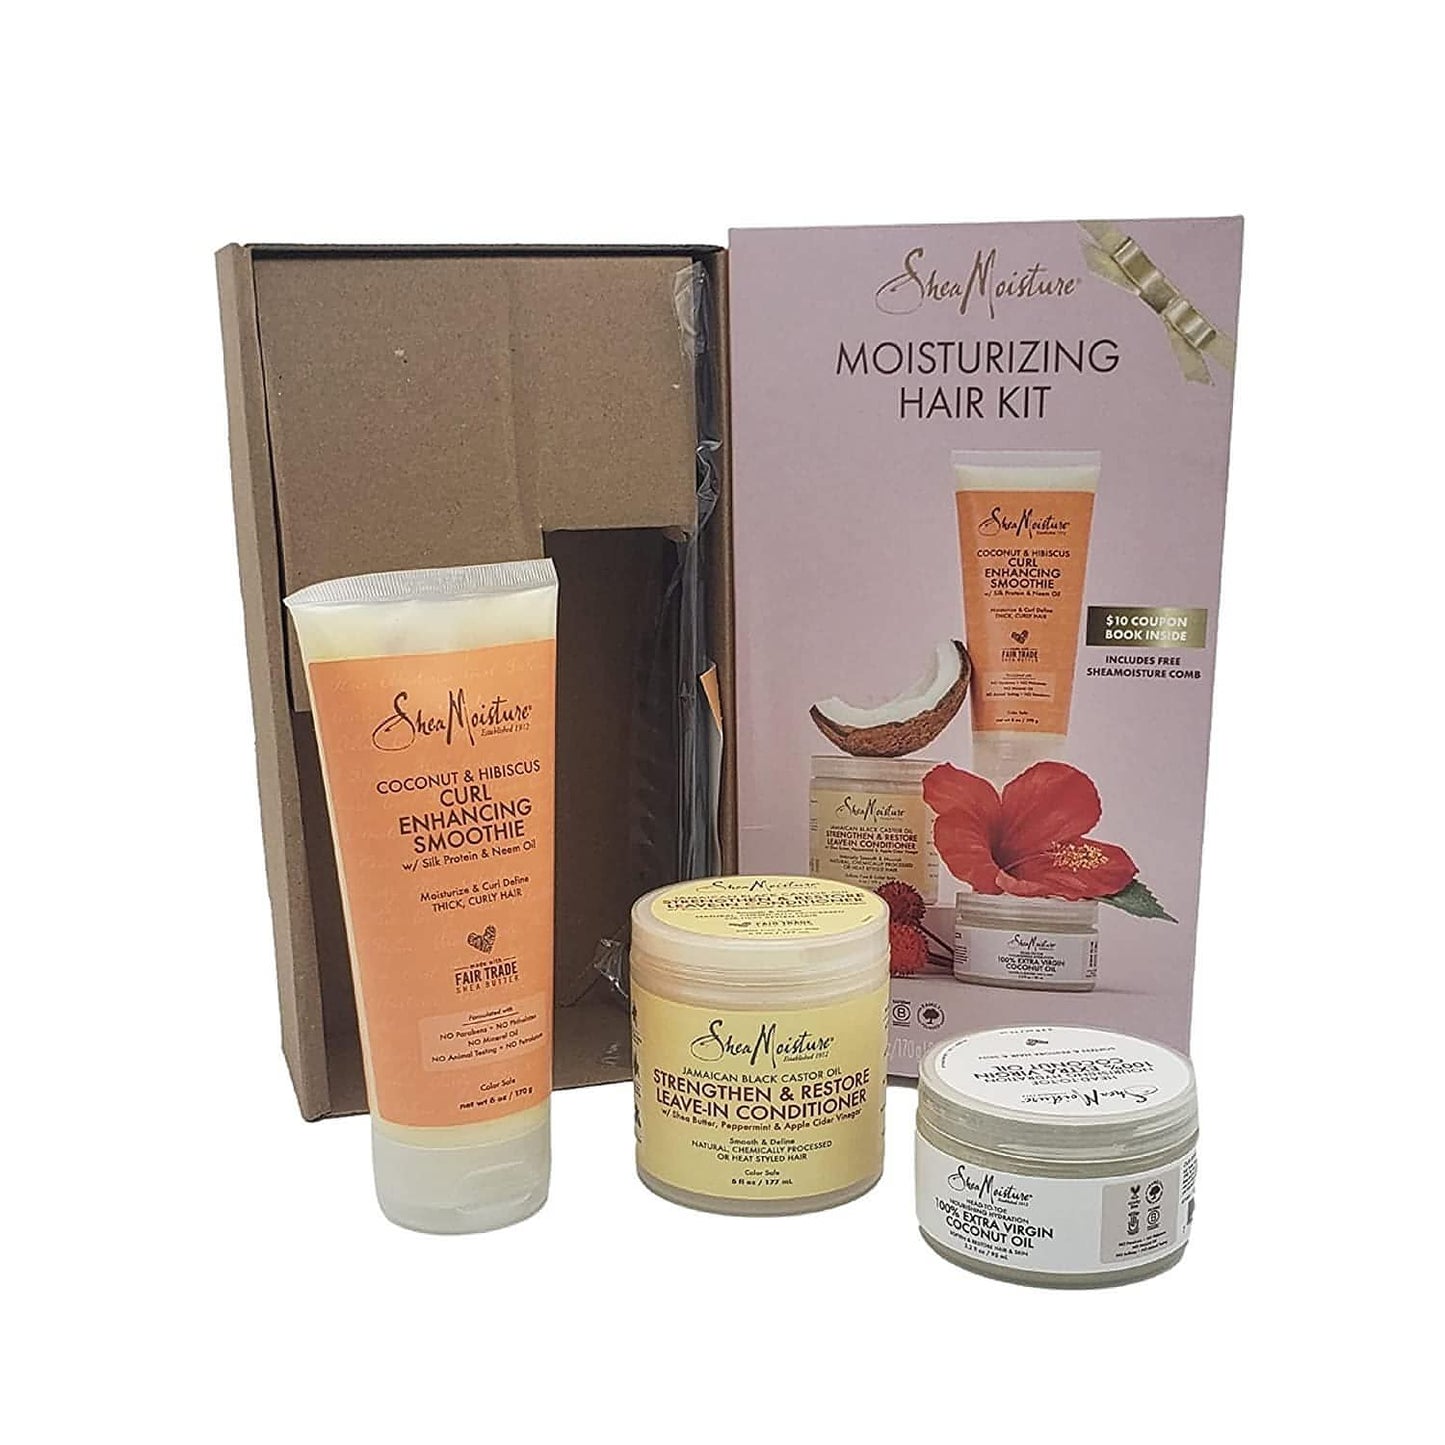 Shea Moisture Moisturizing Hair Kit: Leave-In Conditioner 6 oz, Head-to-Toe Nourishing Hydration 100% Extra Virgin Coconut Oil 3.2 fl oz, Coconut &Hibiscus Curl Enhancing Smoothie 6 oz